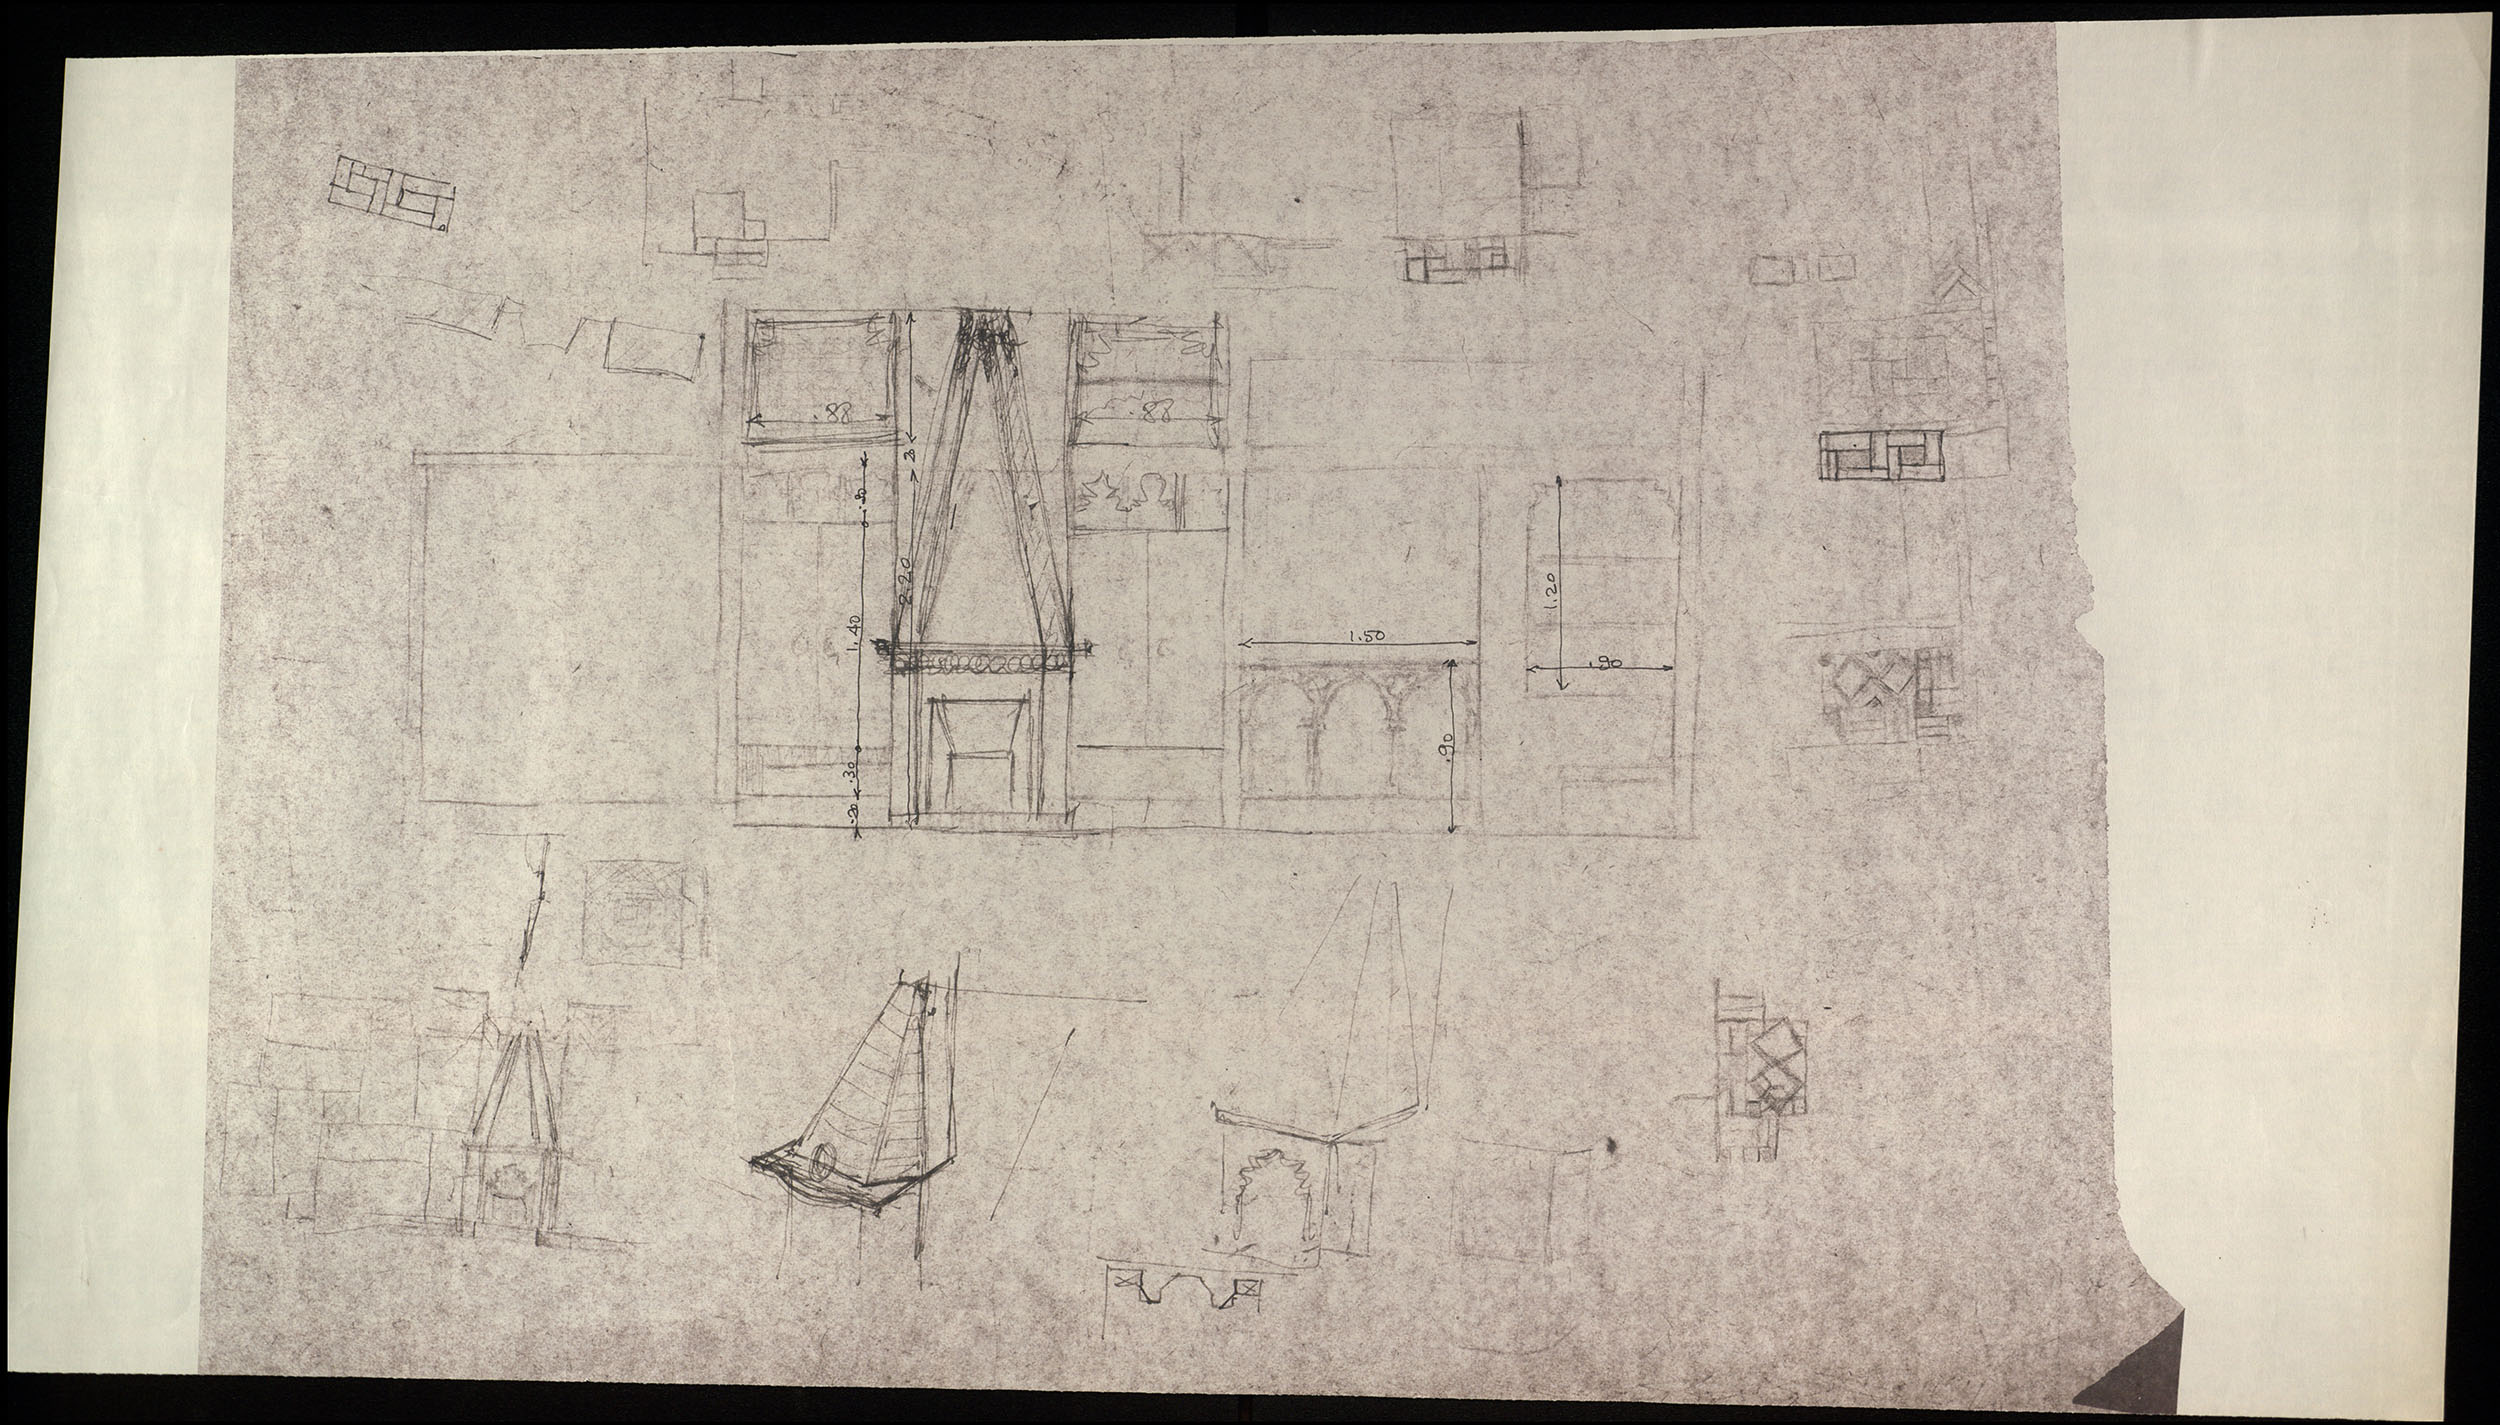 Hassan Fathy - Unidentified sketch of a fireplace, with details